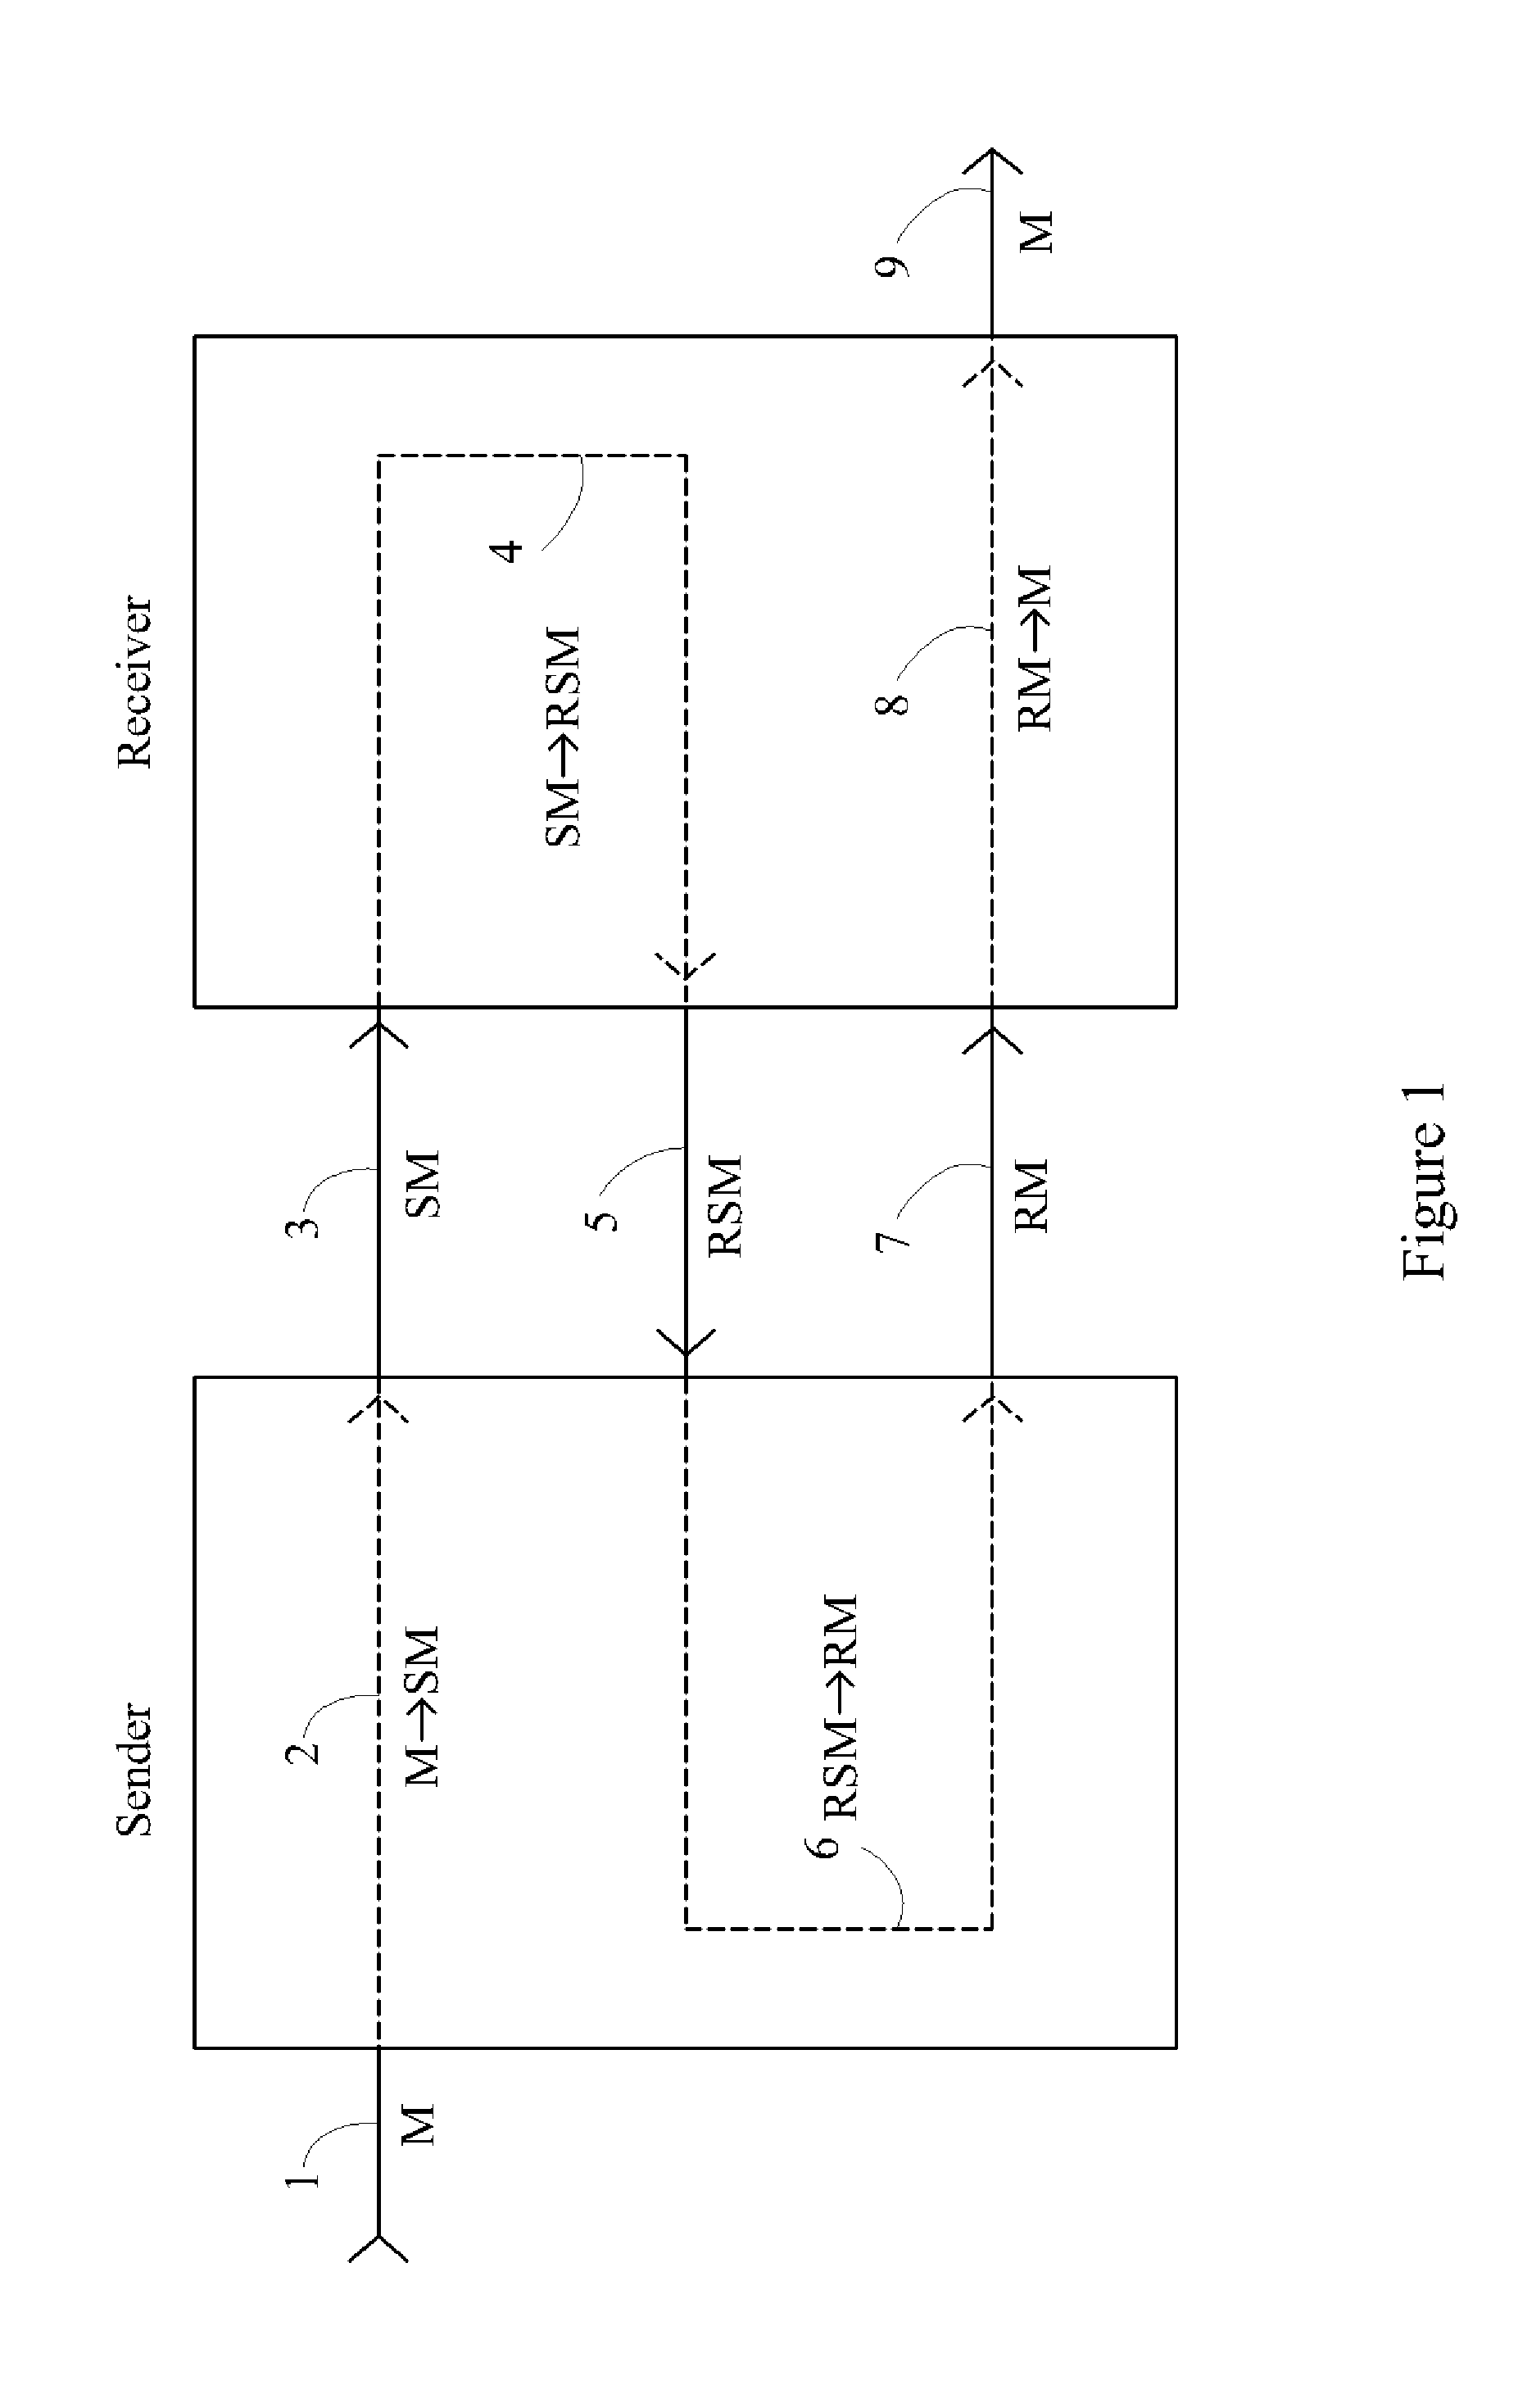 Device, System and Method for Fast Secure Message Encryption Without Key Distribution